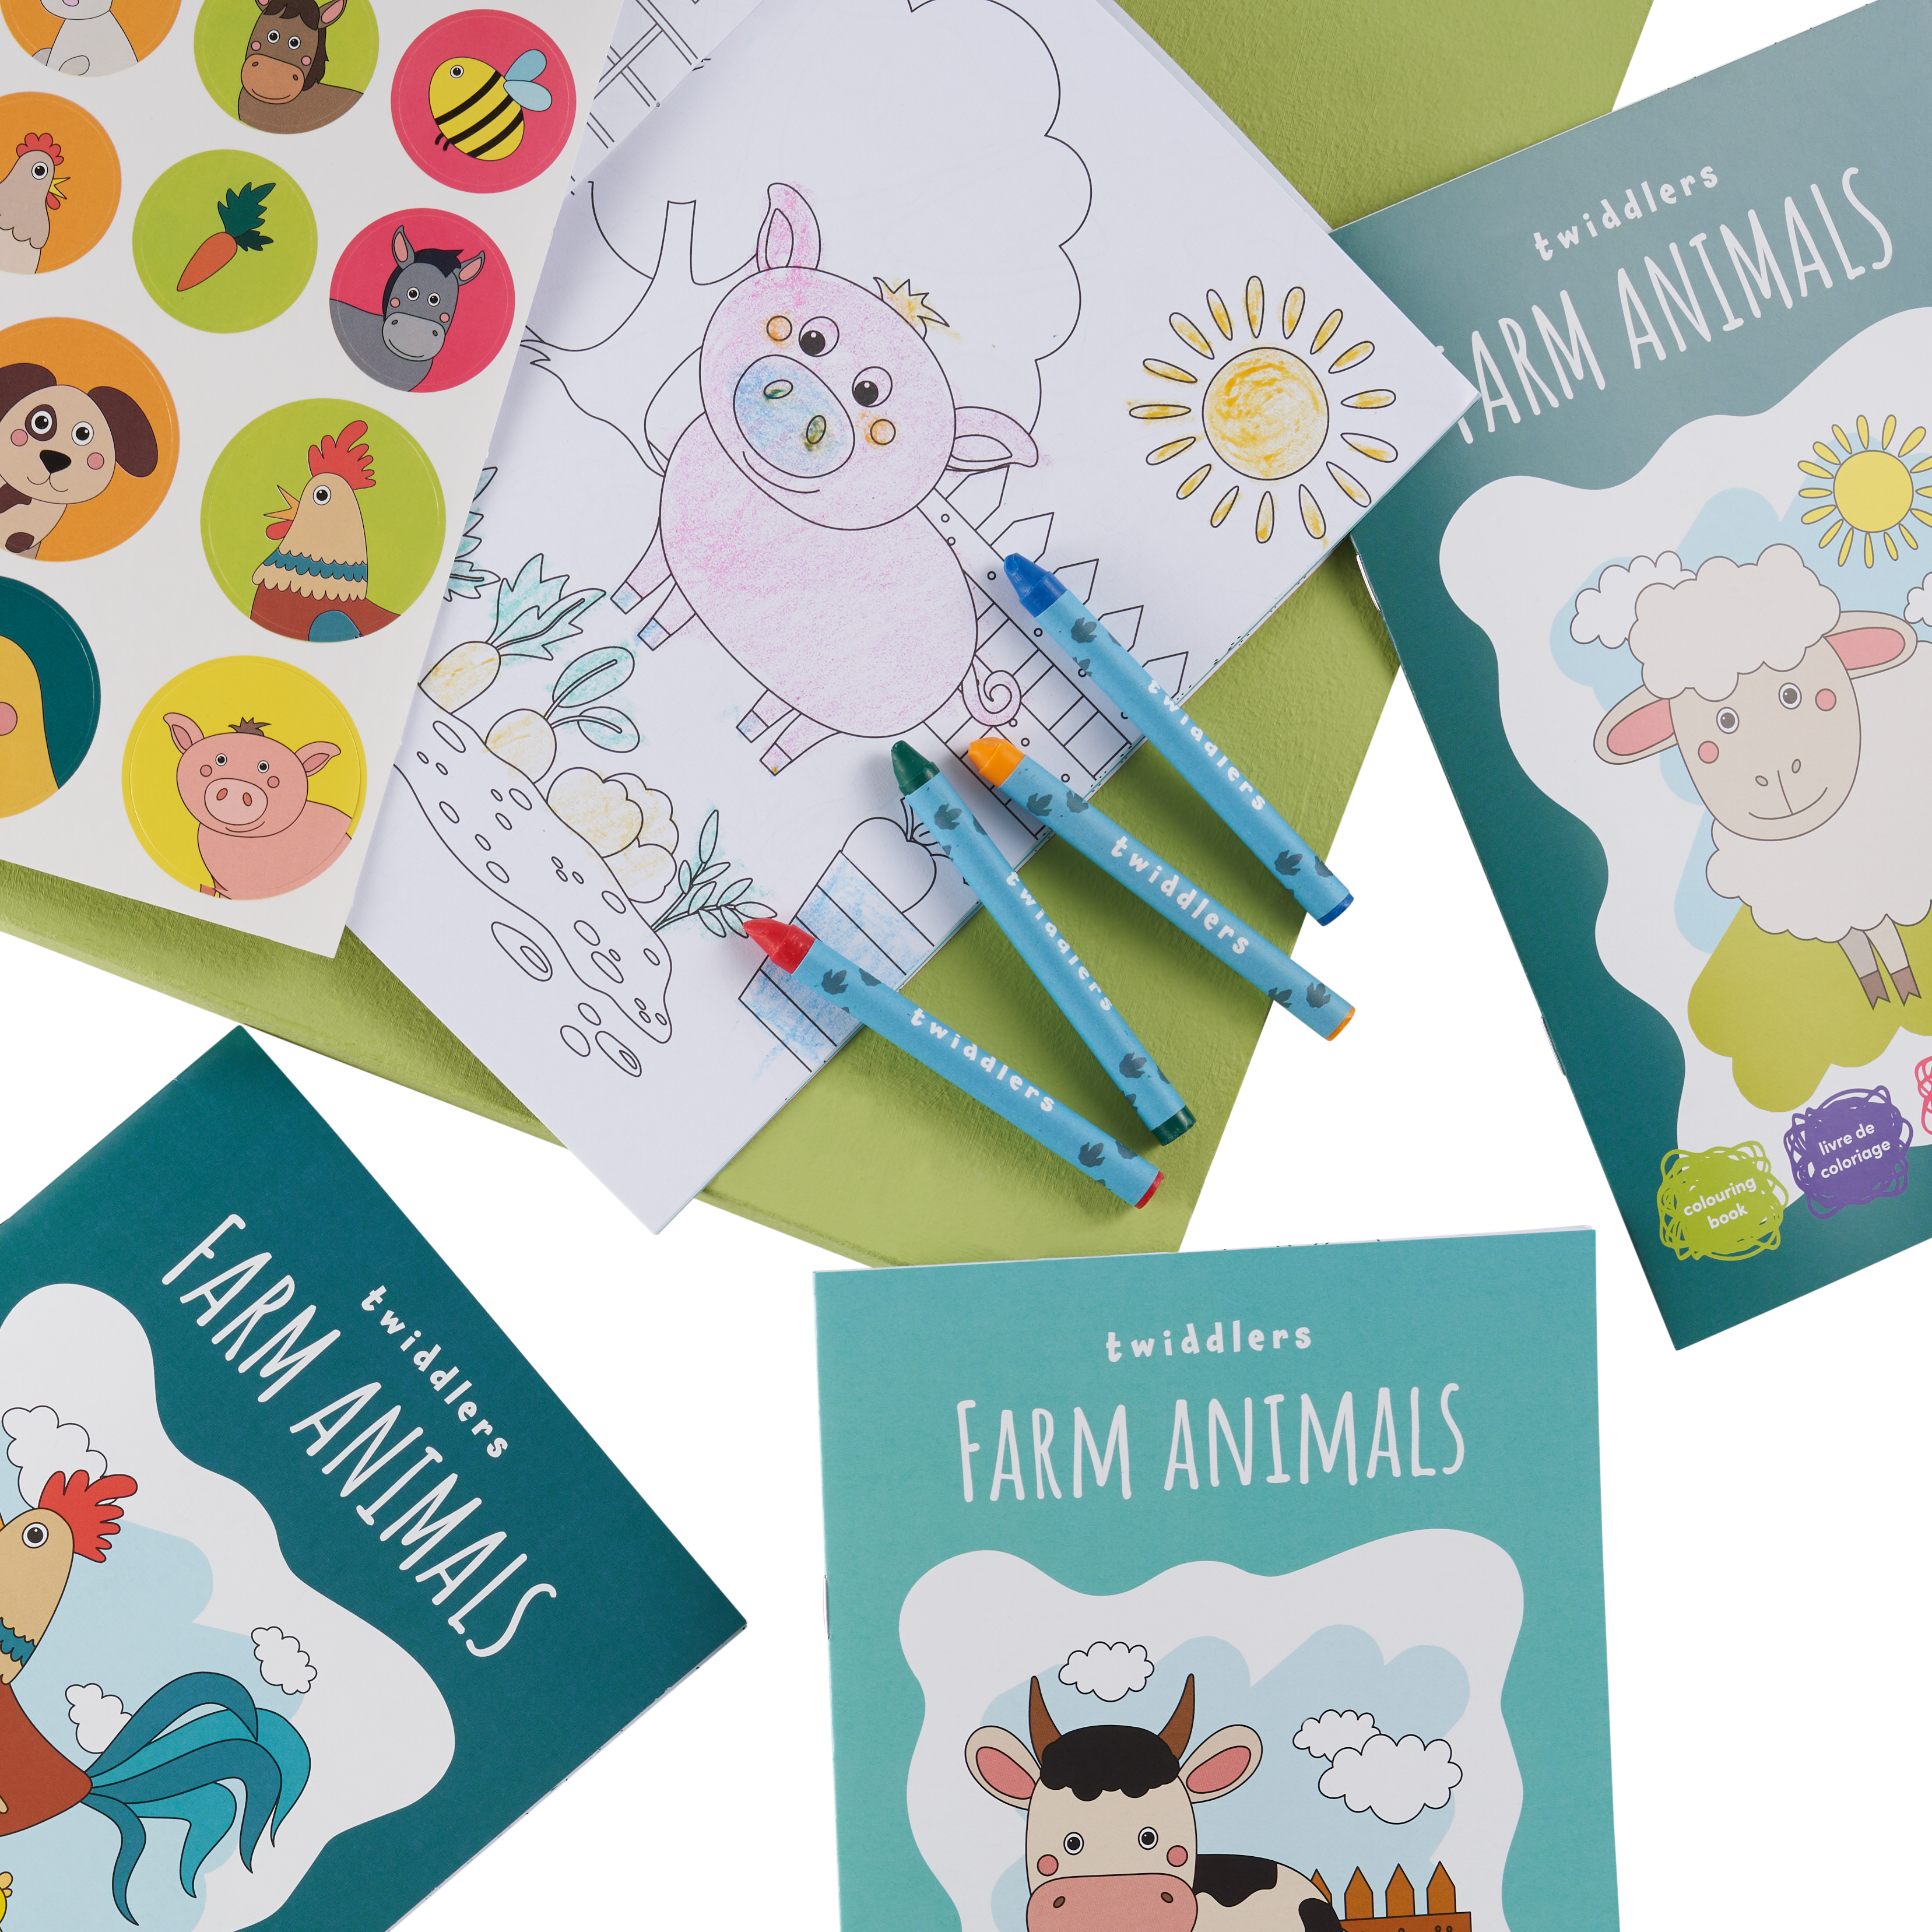 12 Farm Animals Colouring Books with Crayons & Stickers